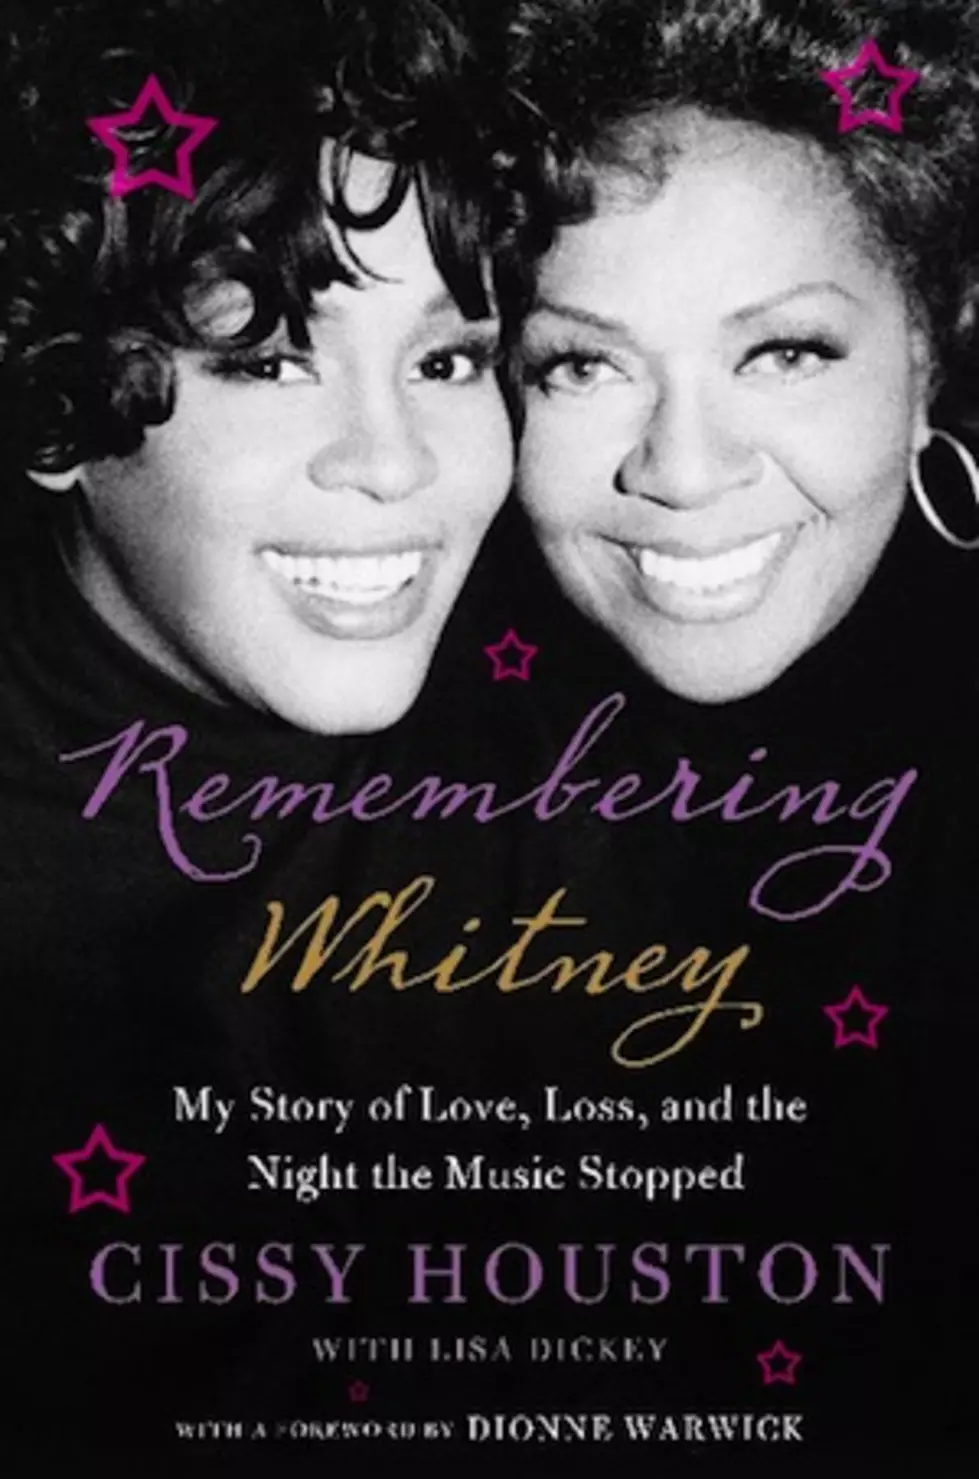 Cissy Houston Marks the One-Year Anniversary of Whitney&#8217;s Death With a New Memoir